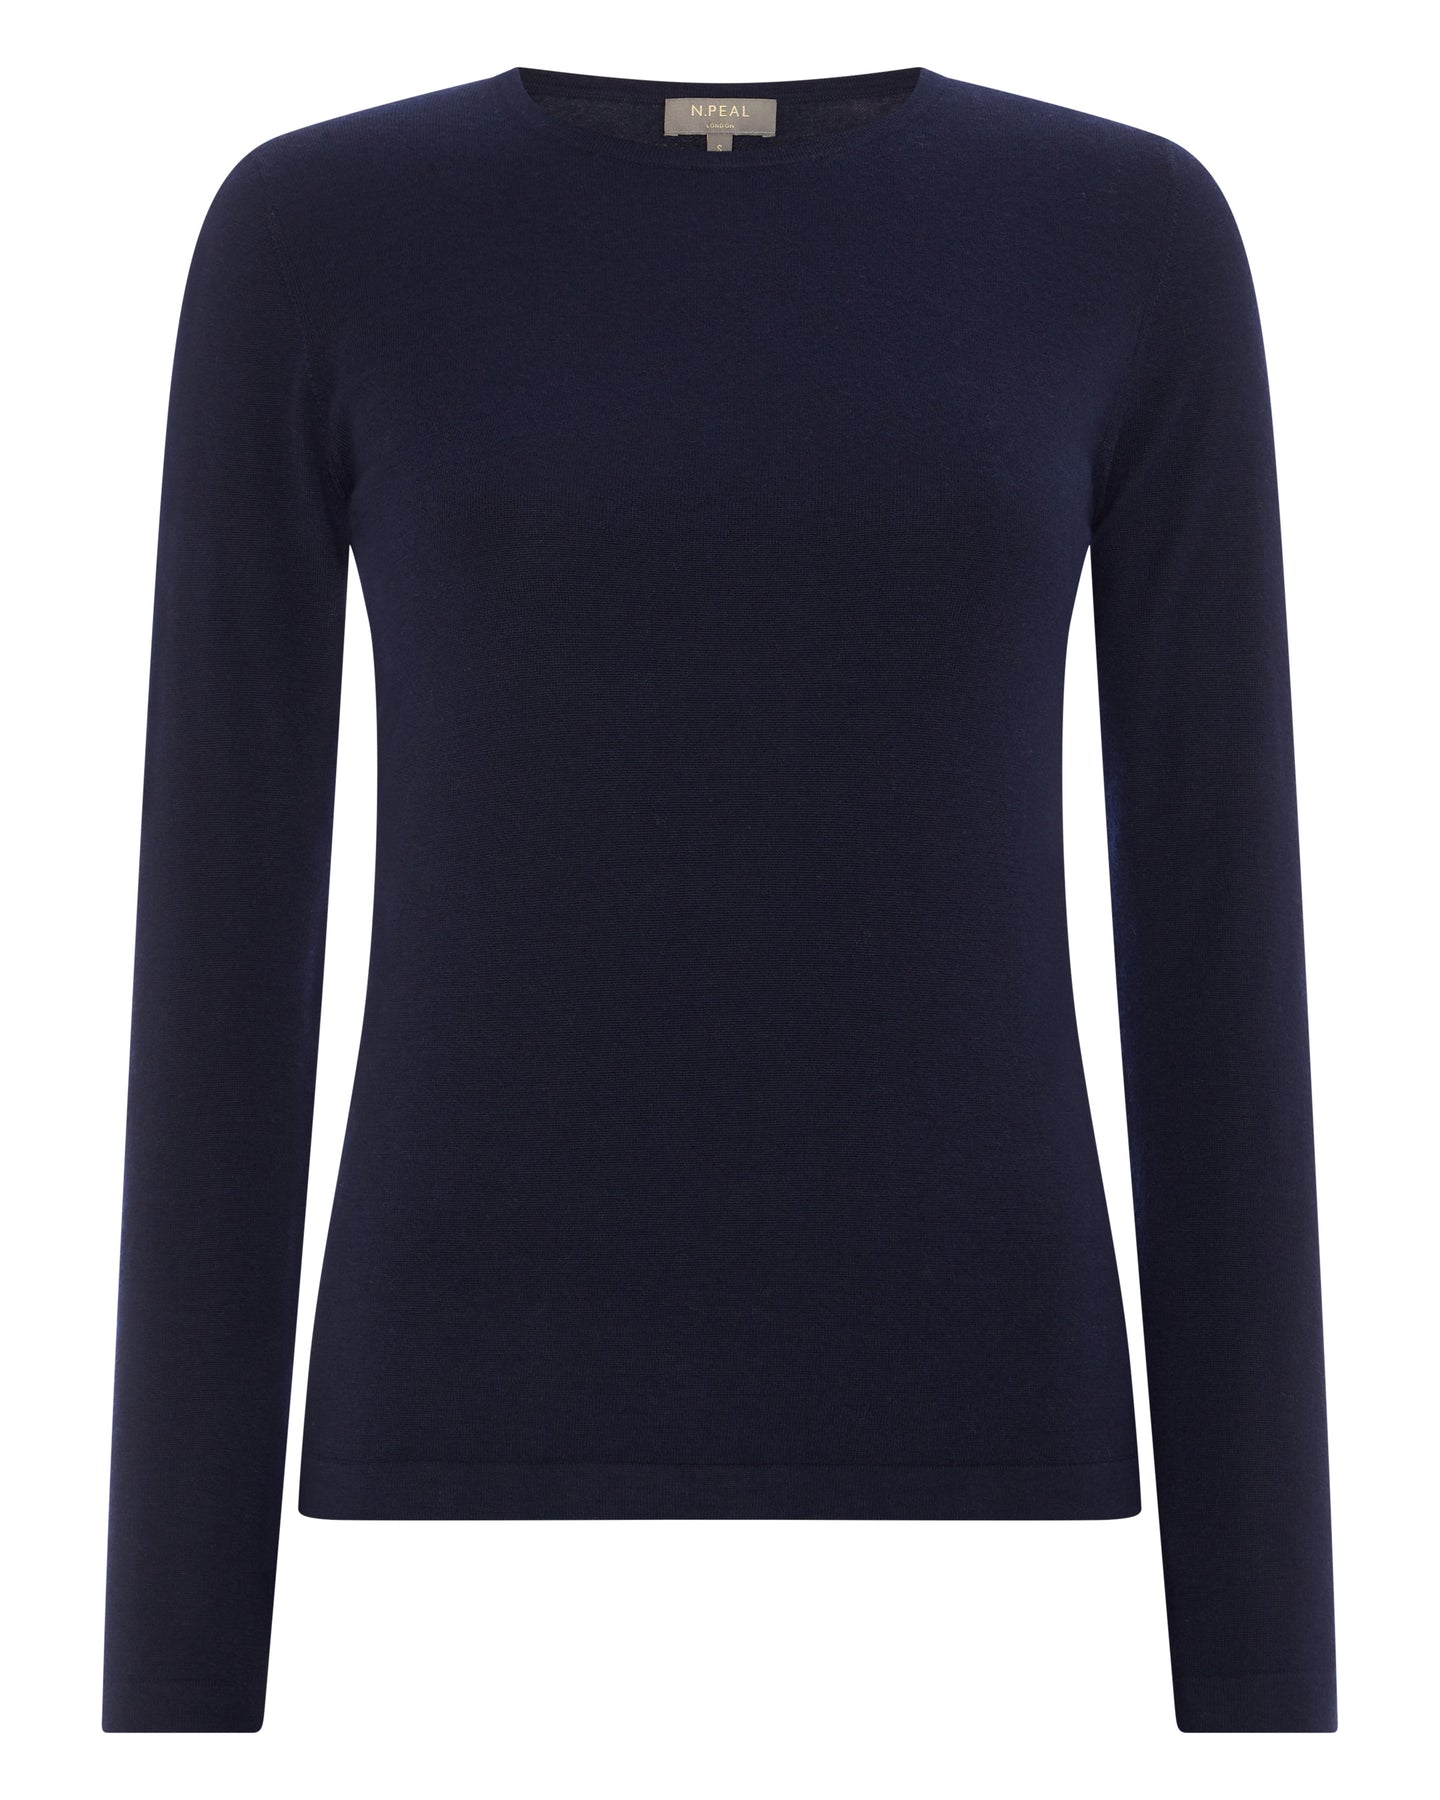 N.Peal Women's Superfine Long Sleeve Cashmere Top Navy Blue